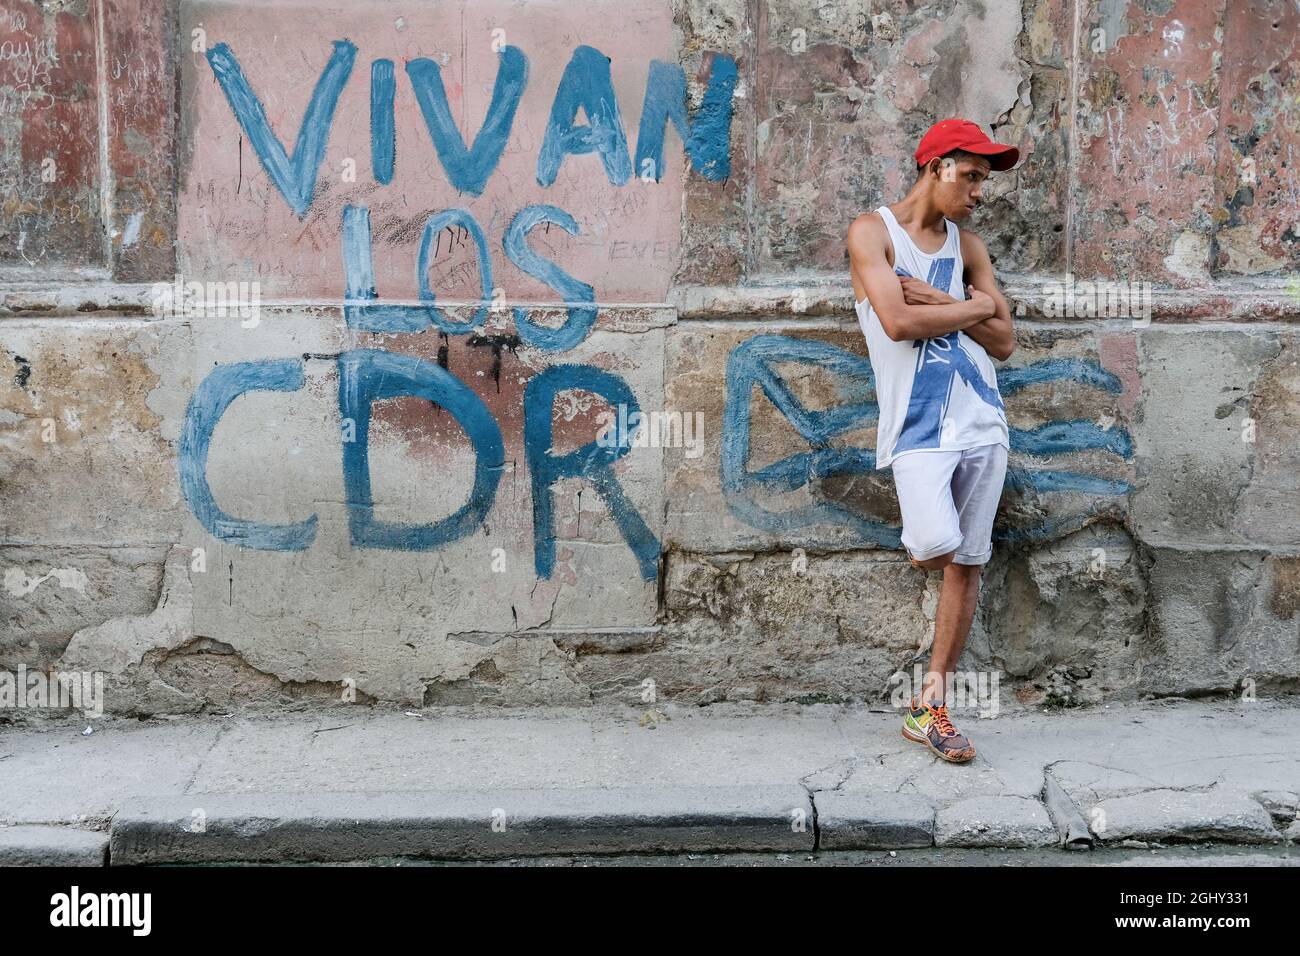 A man stands next to graffiti that reads 'Vivan Los CDR' in Havana, Cuba. Stock Photo